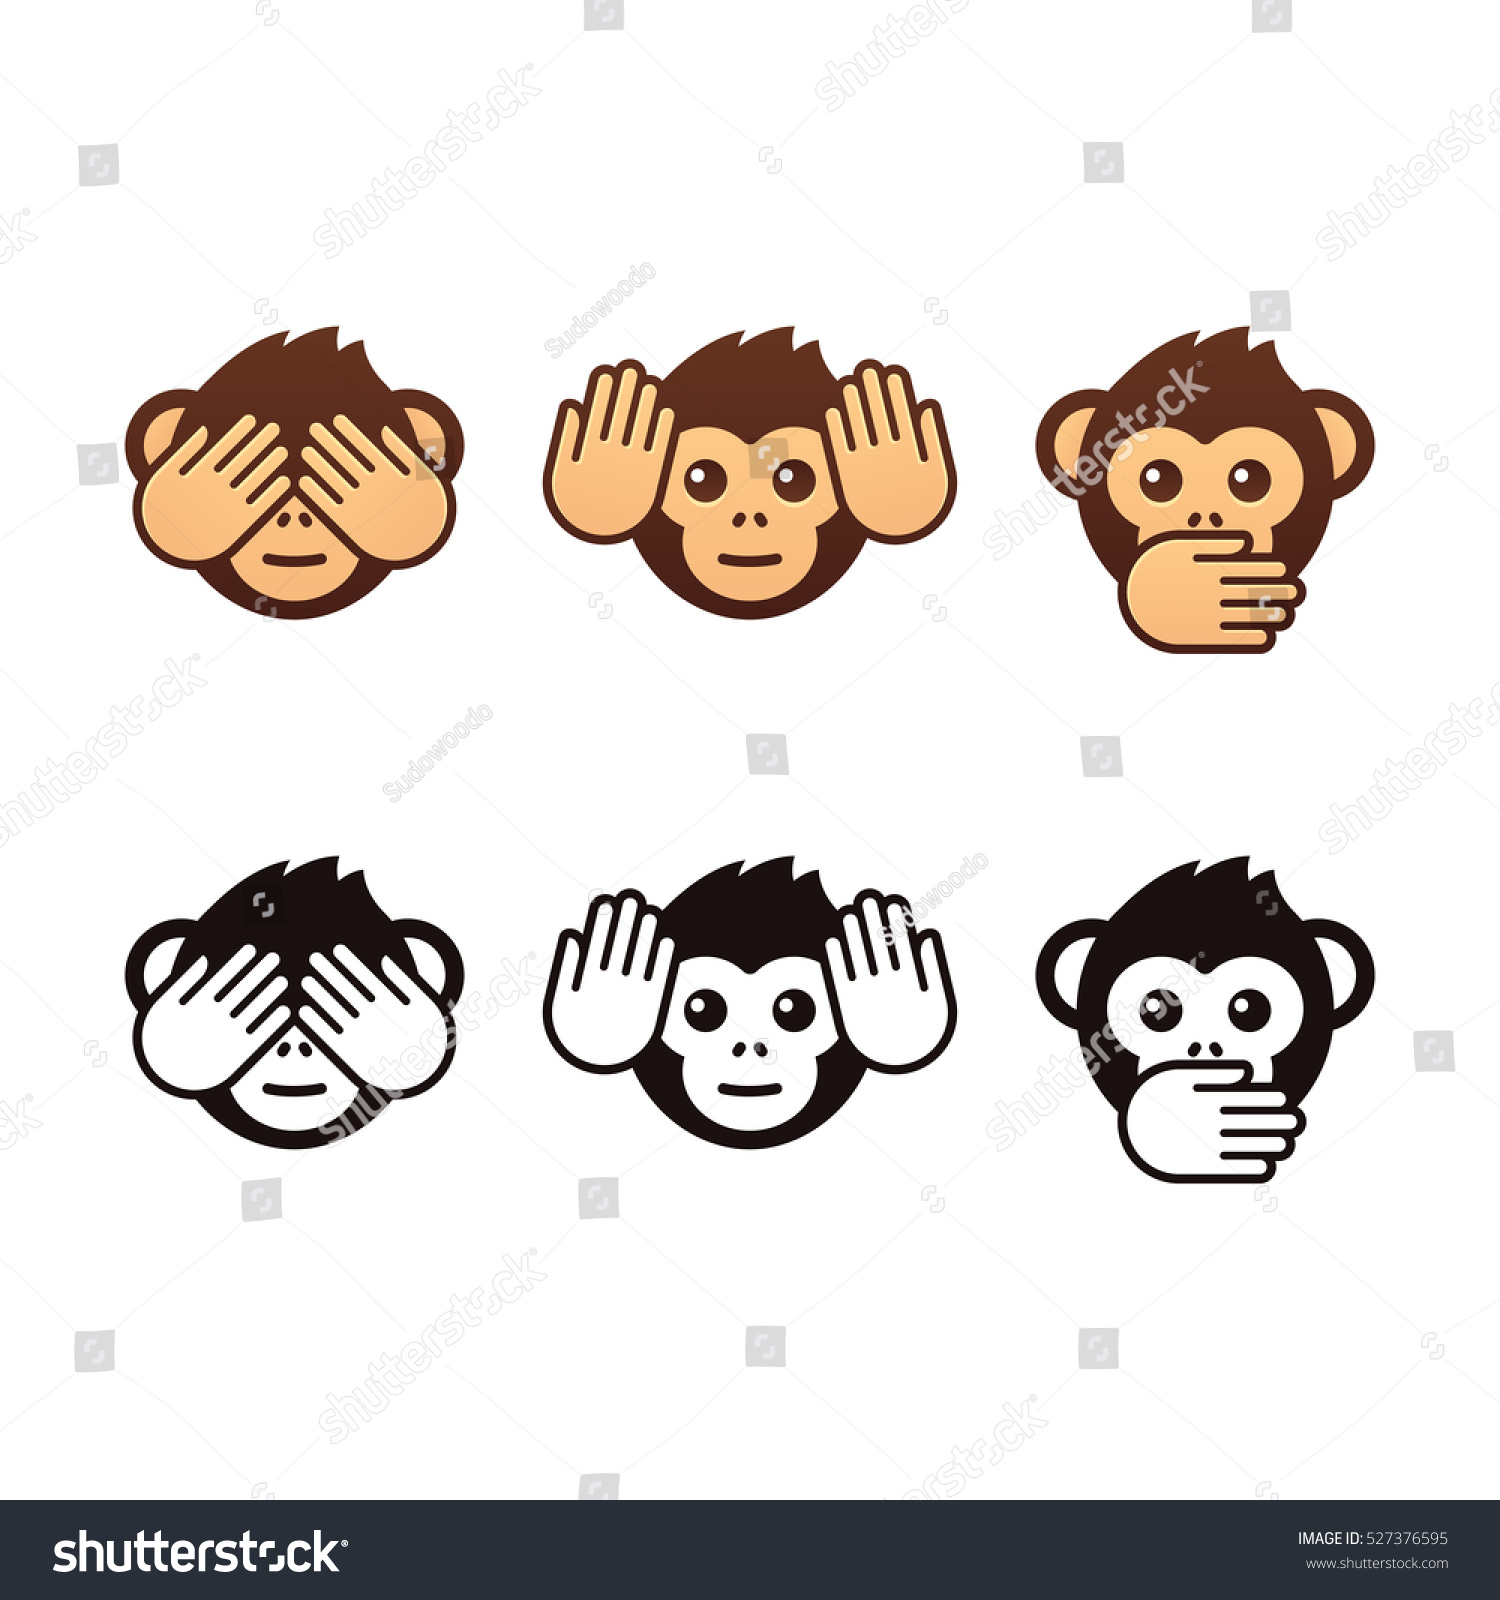 SVG of See no evil, hear no evil, speak no evil. Three wise monkeys vector icons. Color and black and white version. svg